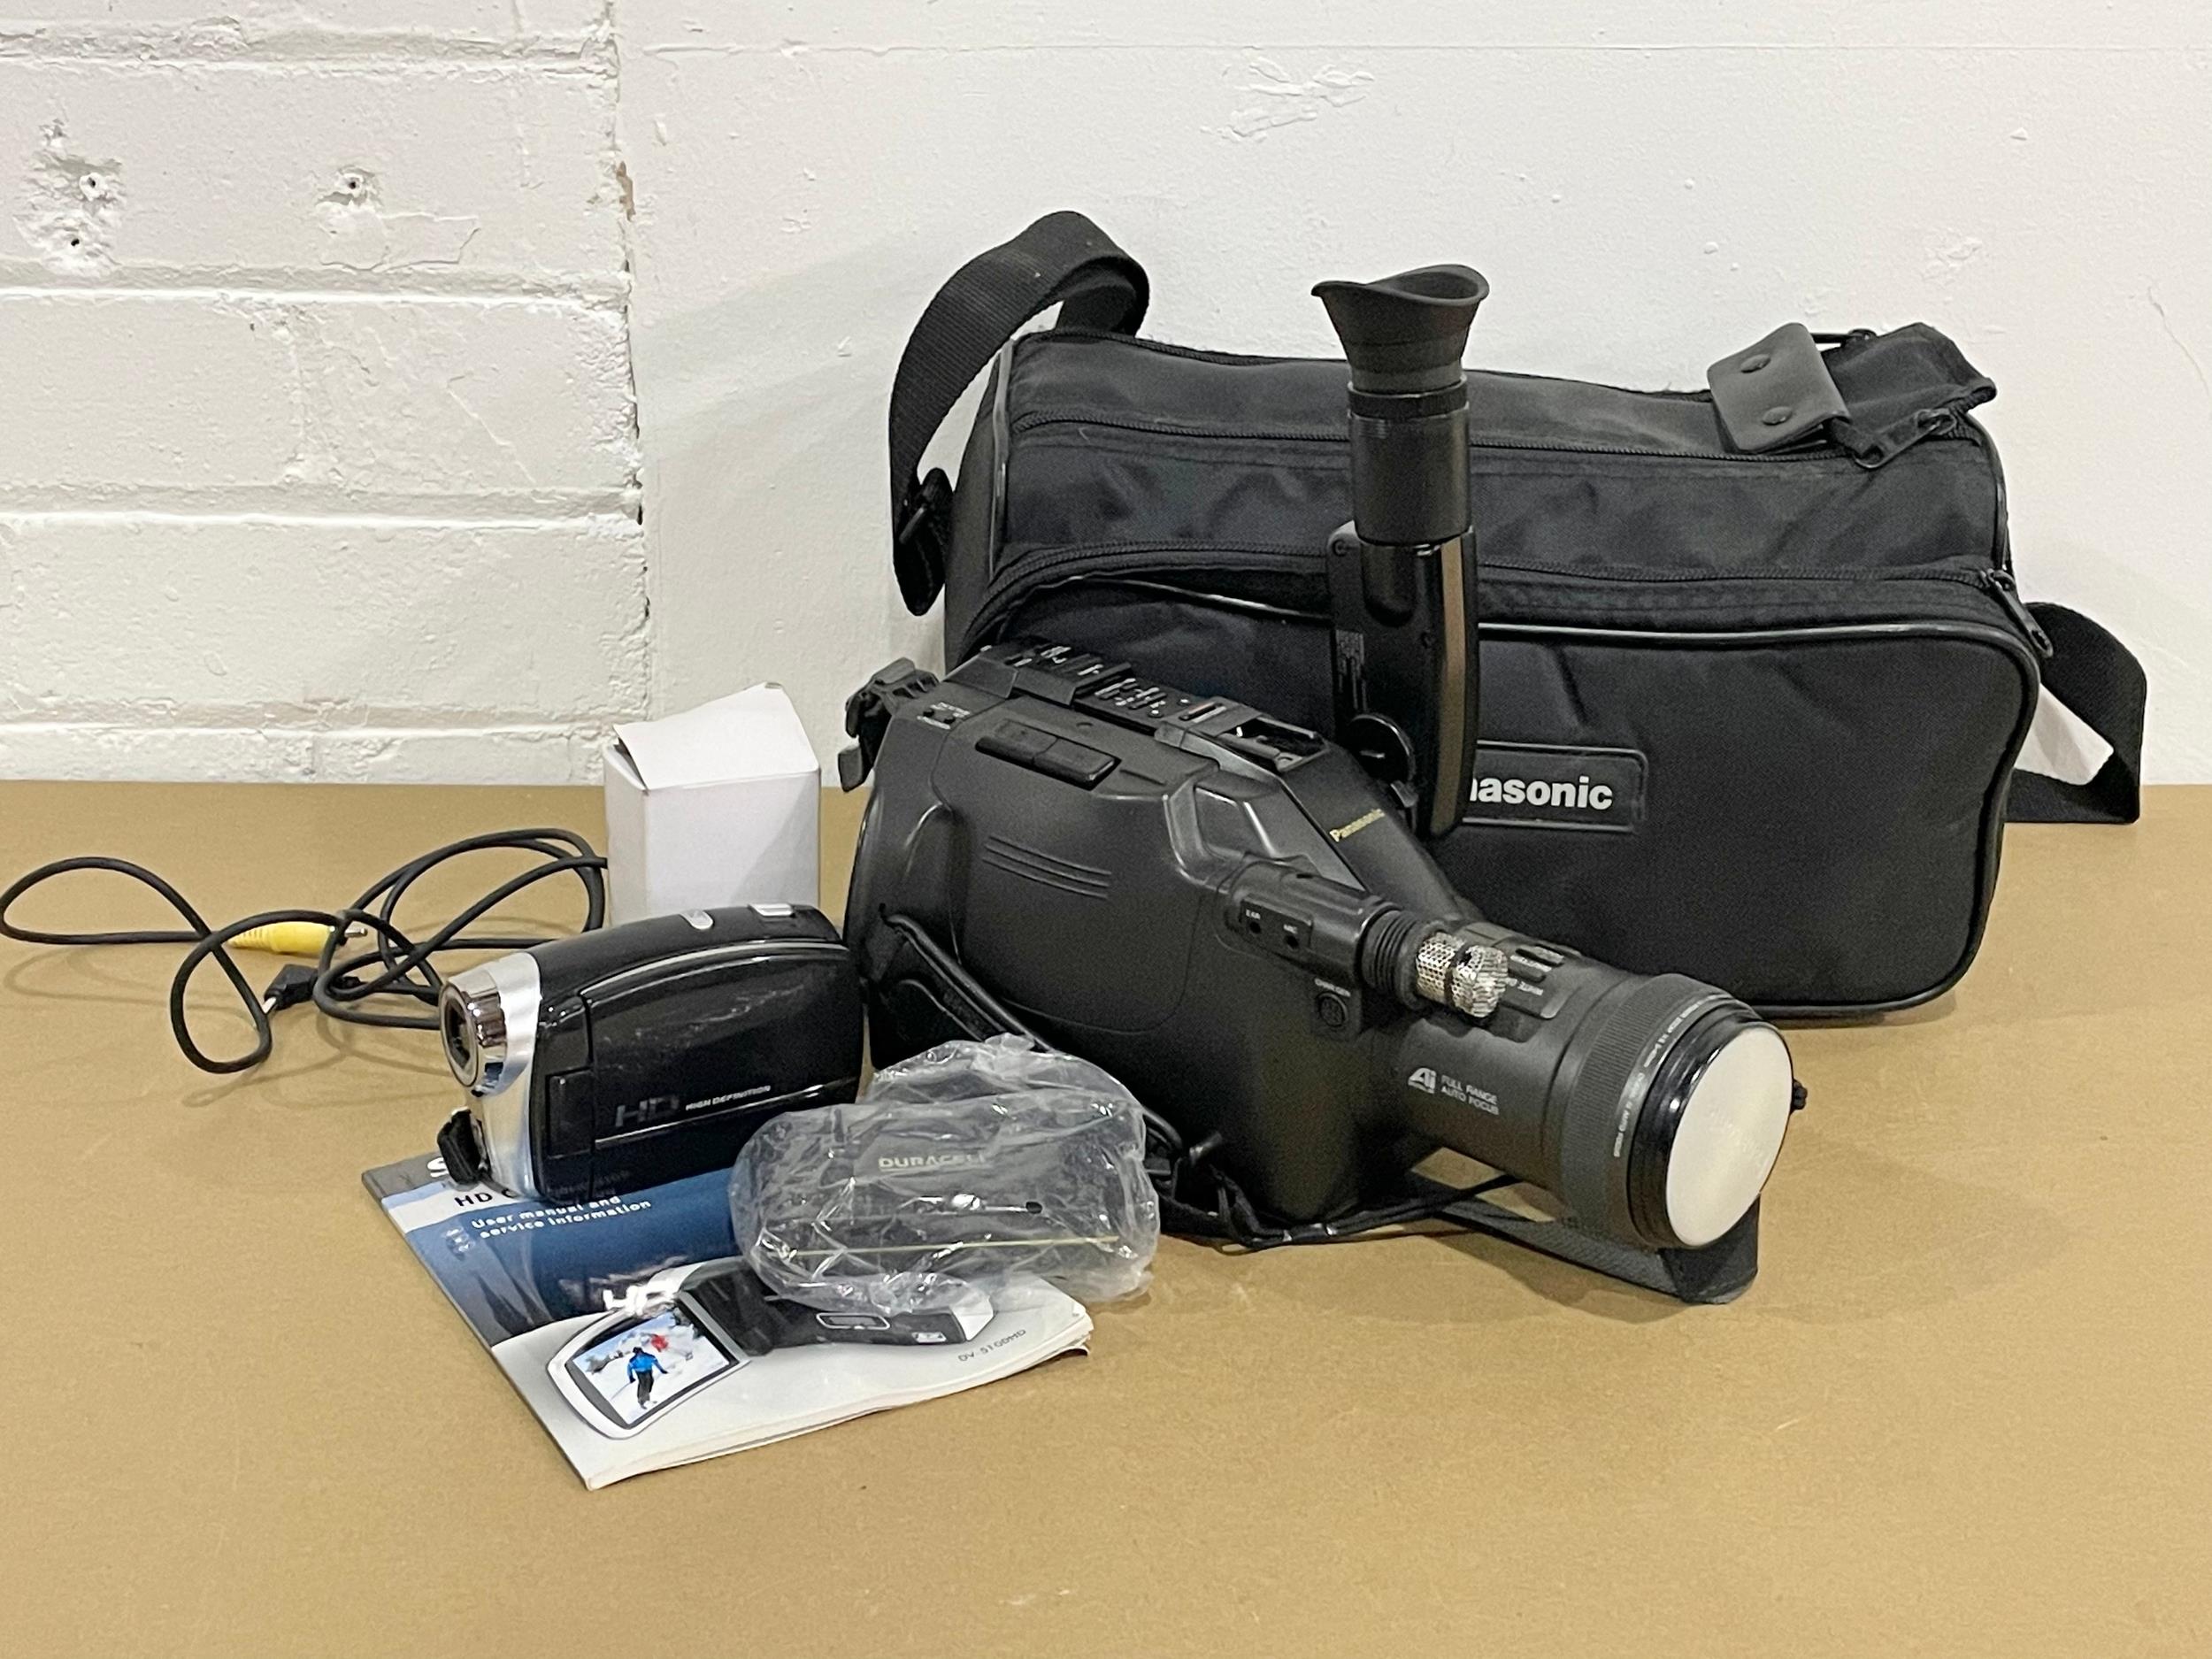 A Panasonic G202 Movie Camera in bag with a Silver Crest Home Tech HD Camcorder.